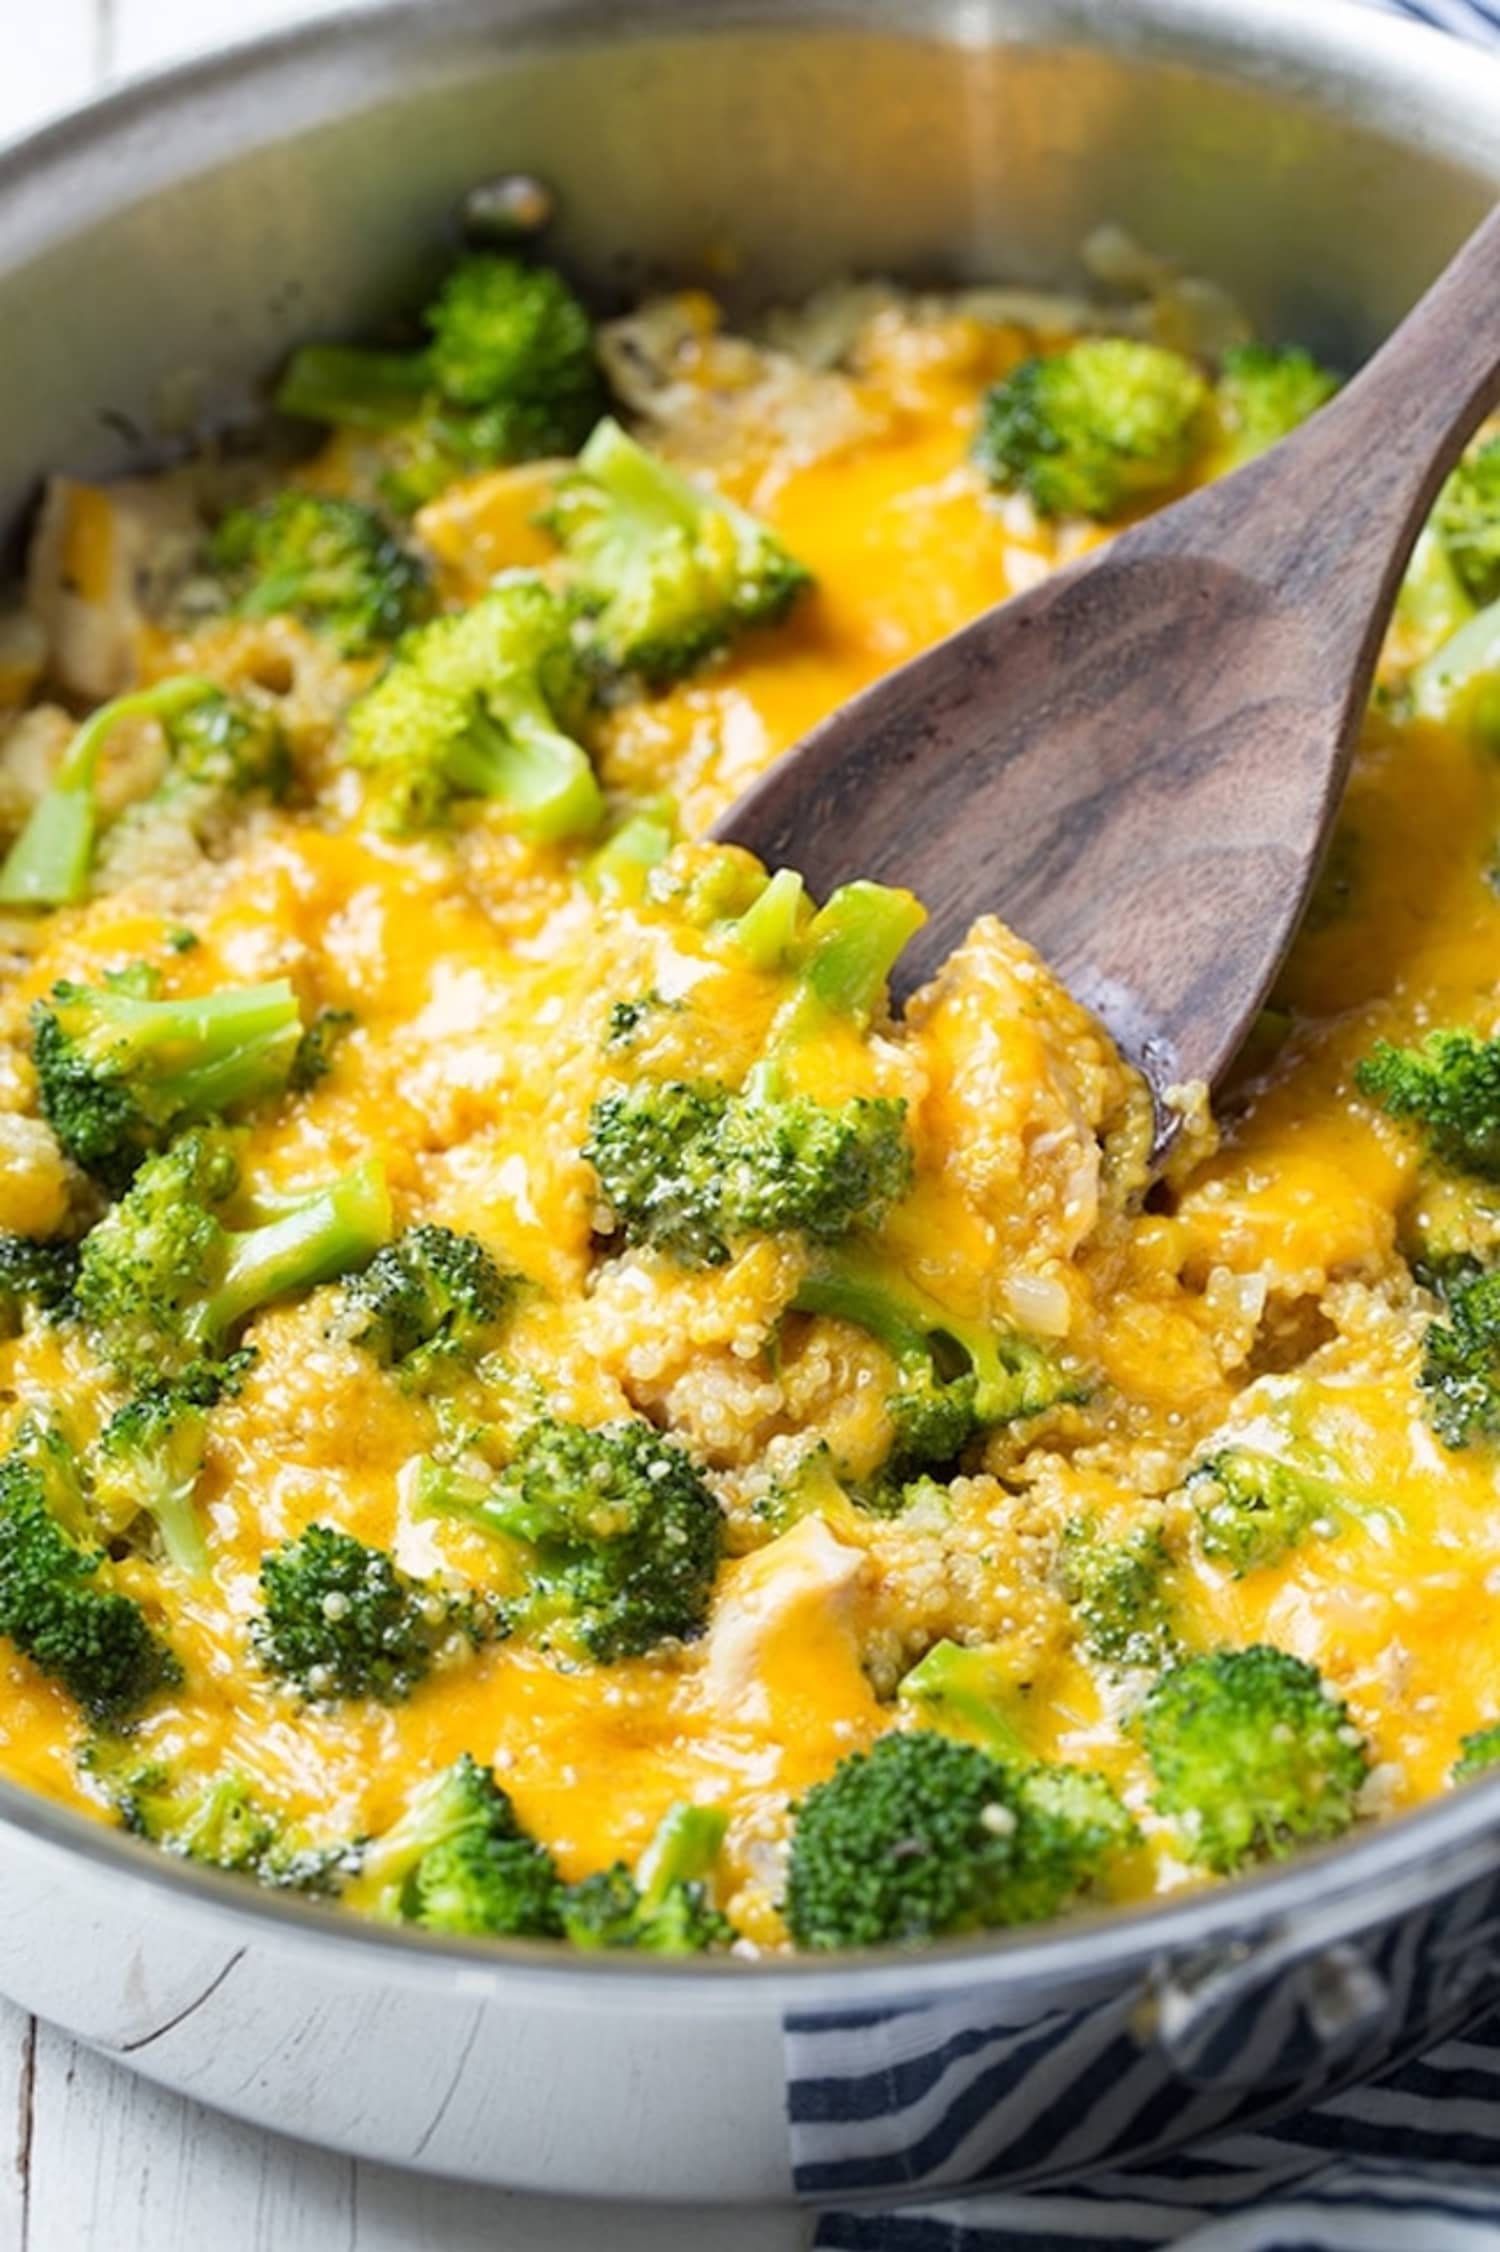 This One-Pan Cheesy Chicken Broccoli Couldn’t Be Easier